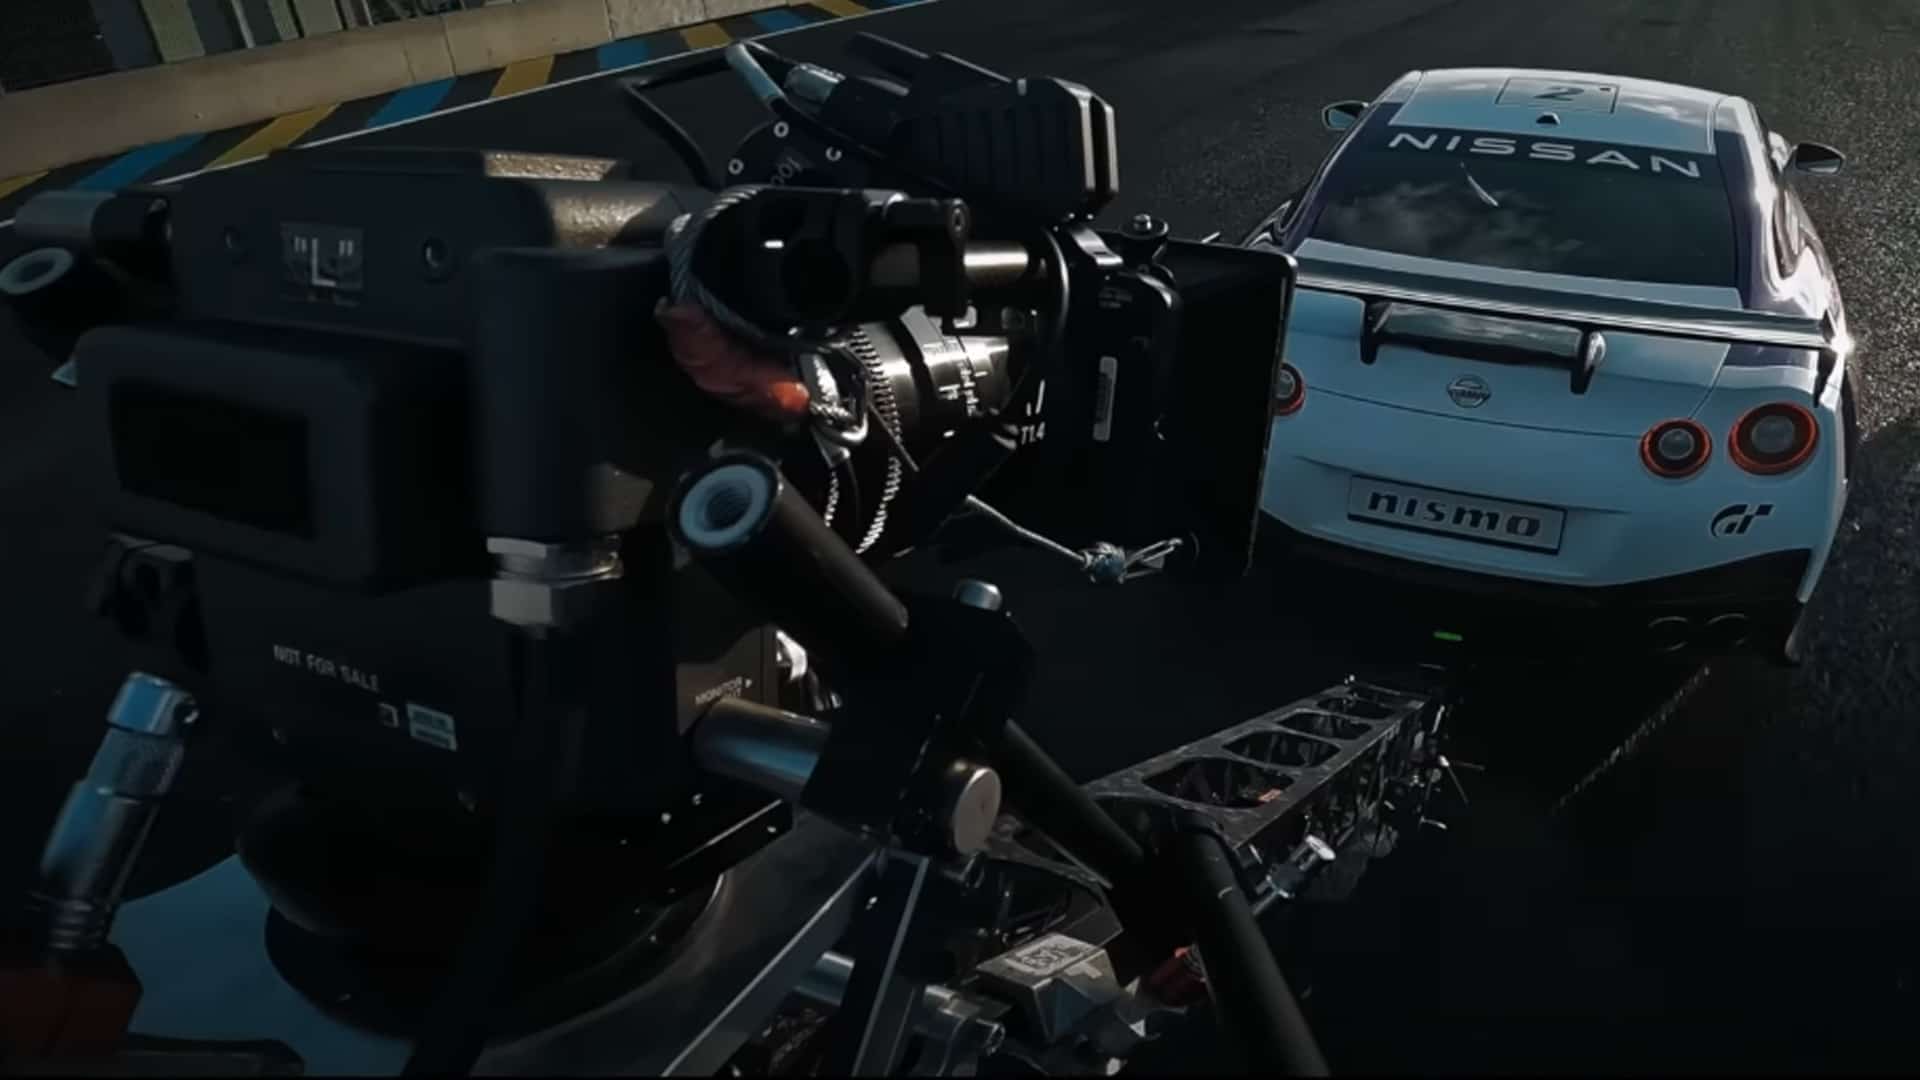 The Gran Turismo movie is starting to look promising